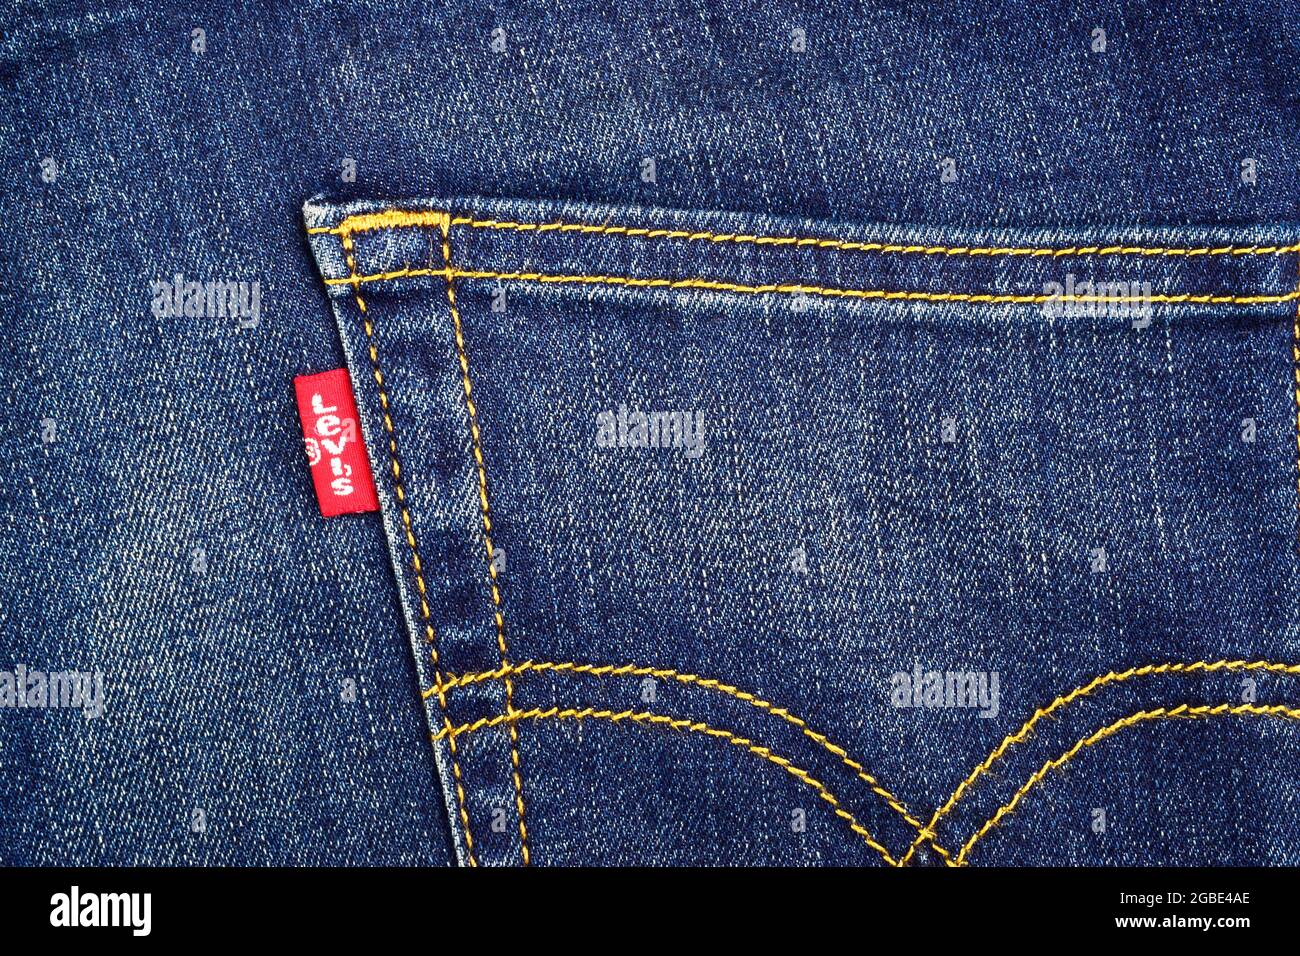 India, New Delhi - October 15, 2018: Close up of the LEVI'S red label on the back pocket of denim jeans. Stock Photo